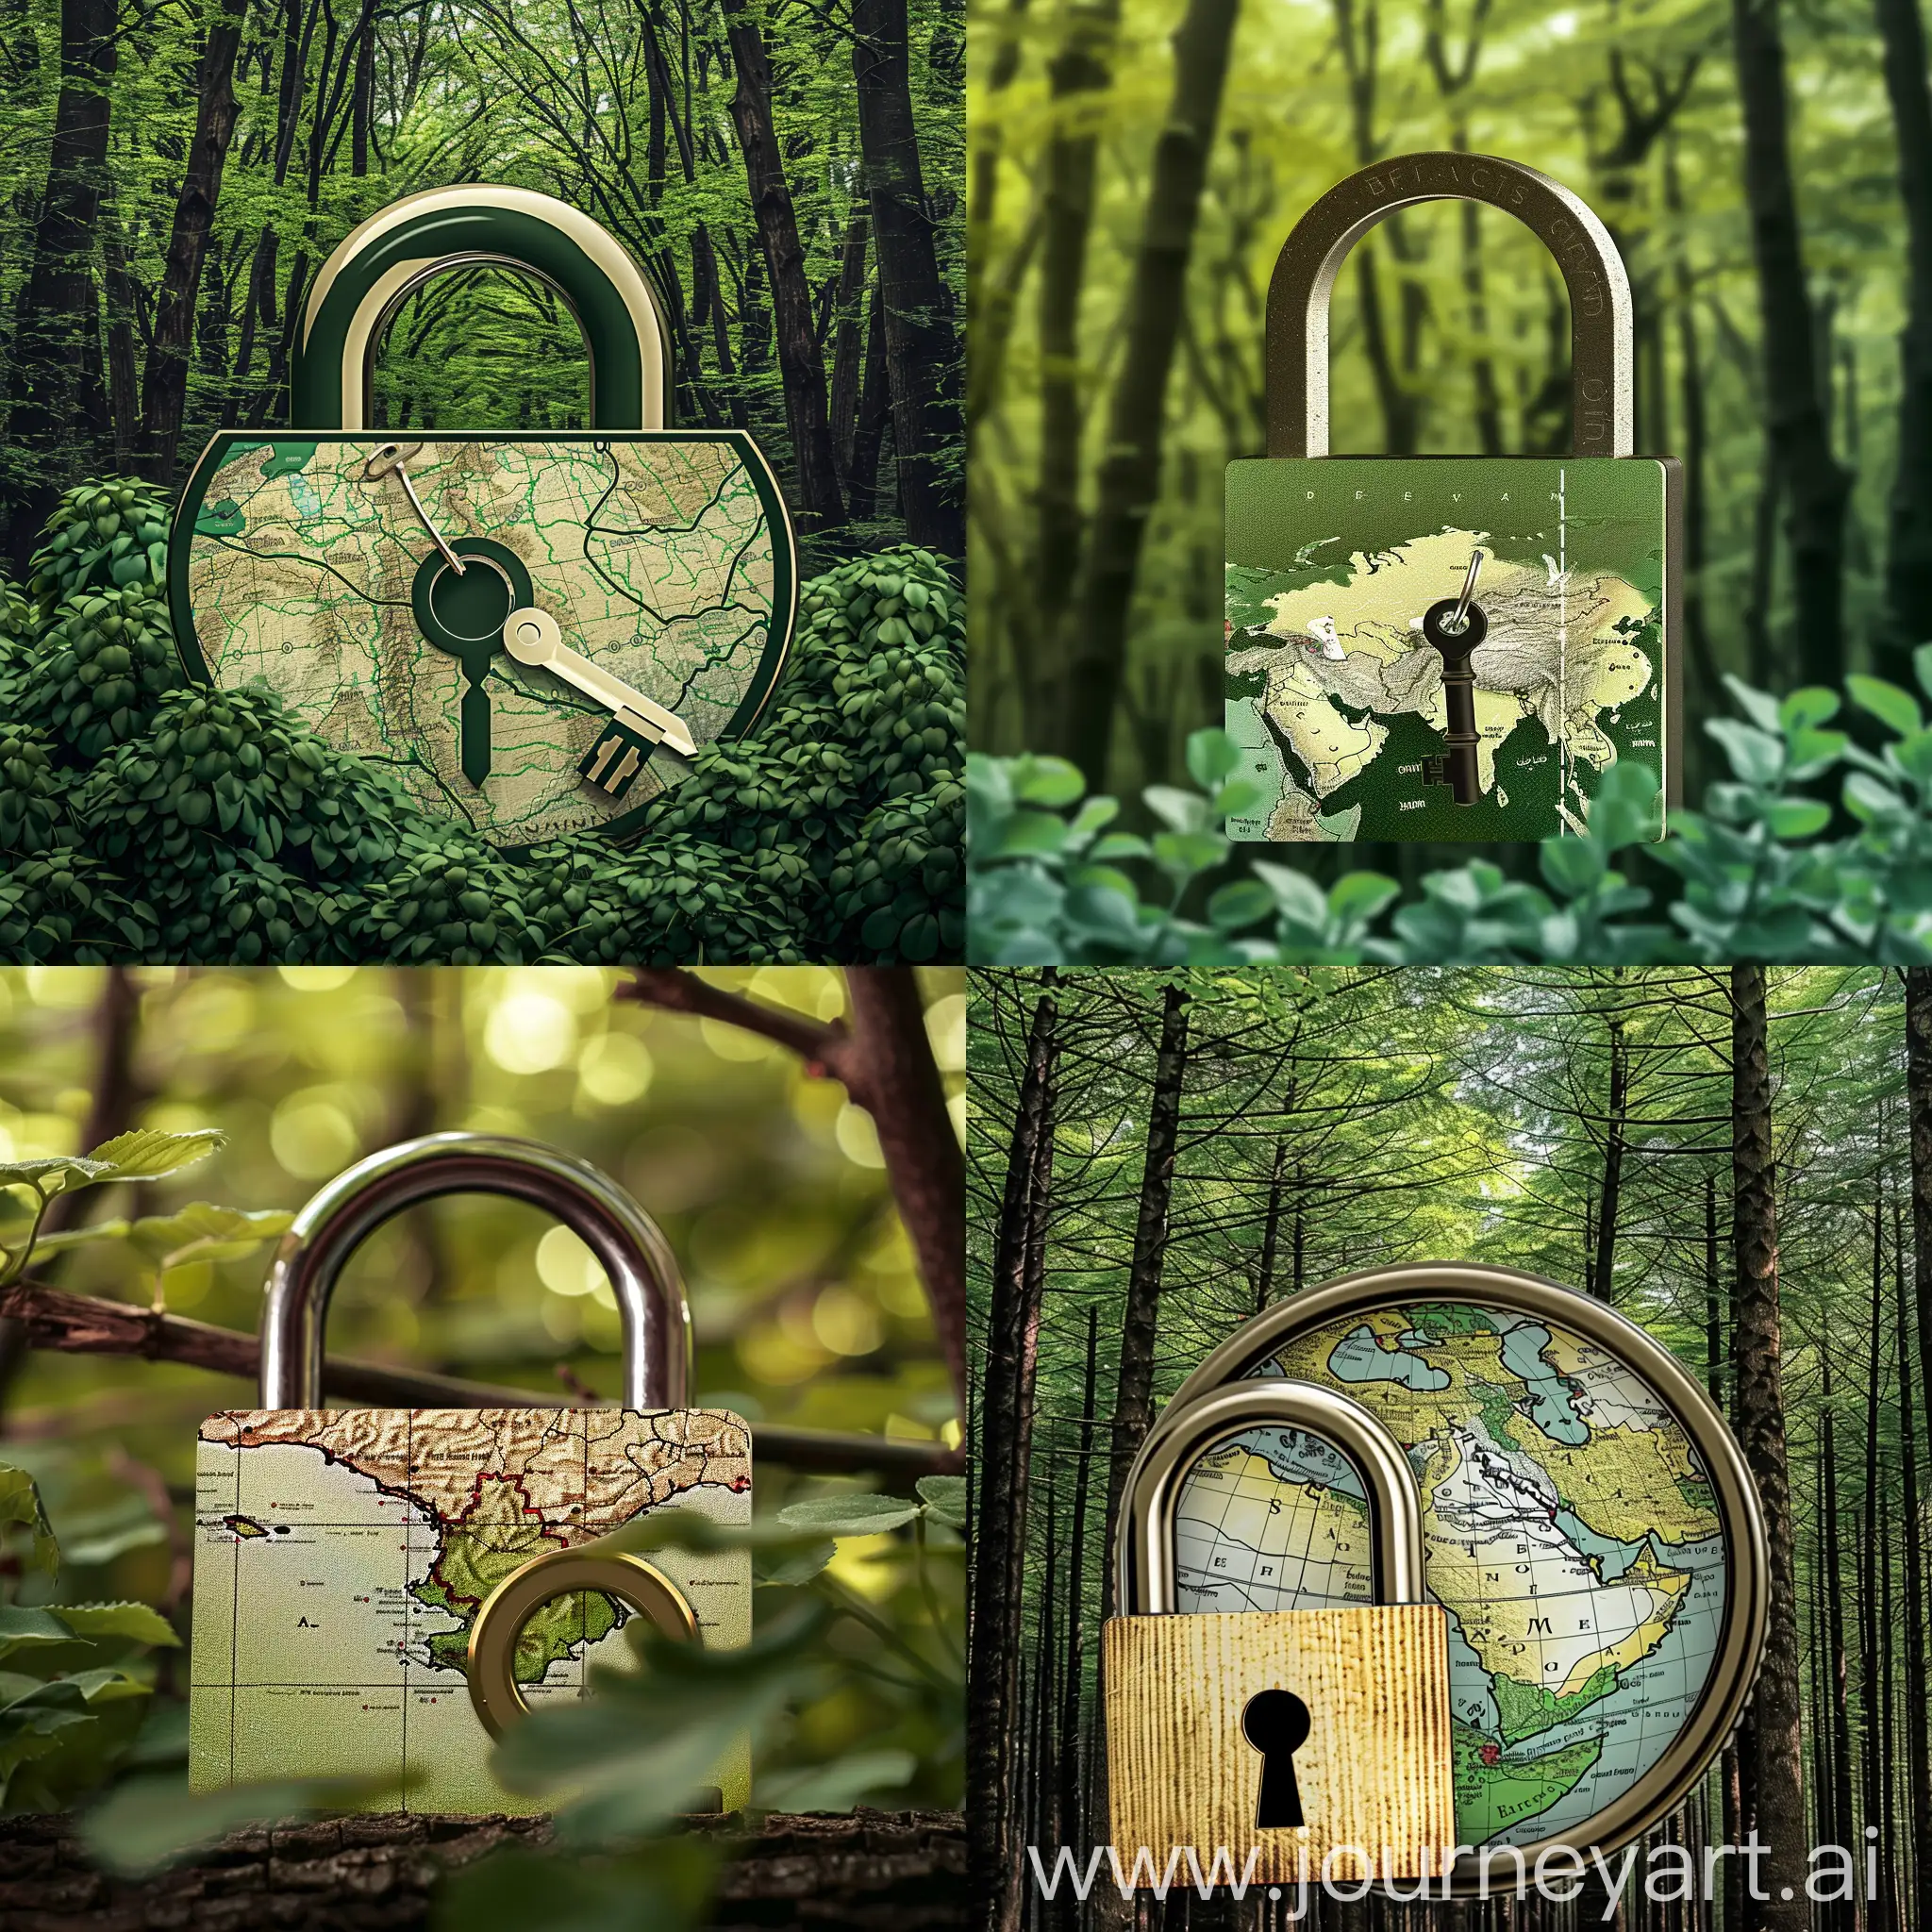 create a photo for a VPN selling company, the following should be in the photo: 1- The behind should be trees and green 2- The front of the picture should be lock with key 3- The map of Iran should also be inside the photo